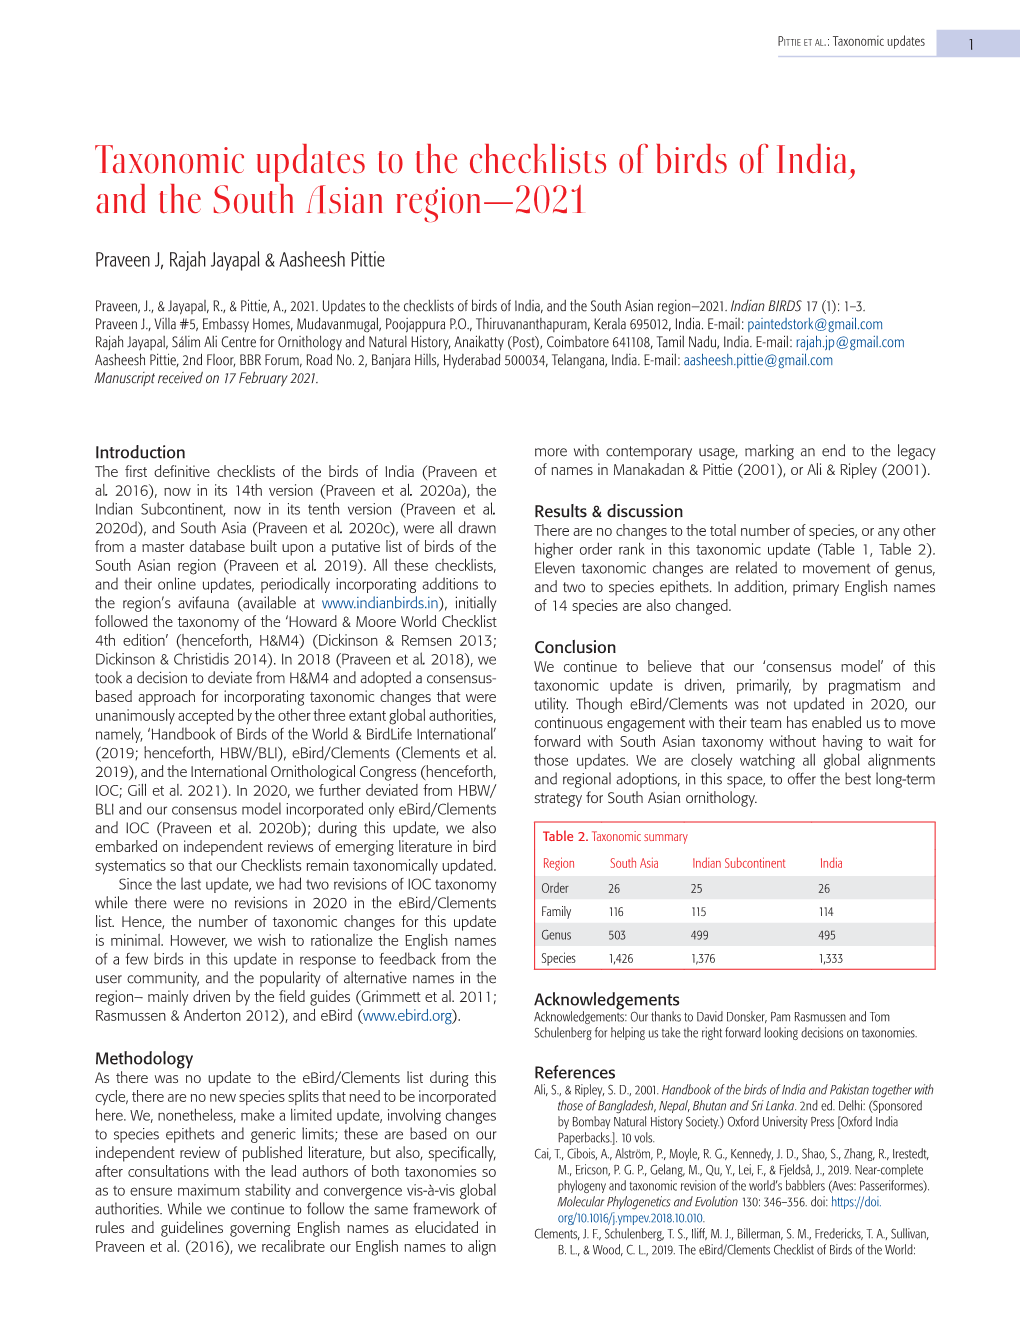 Taxonomic Updates to the Checklists of Birds of India, and the South Asian Region—2021